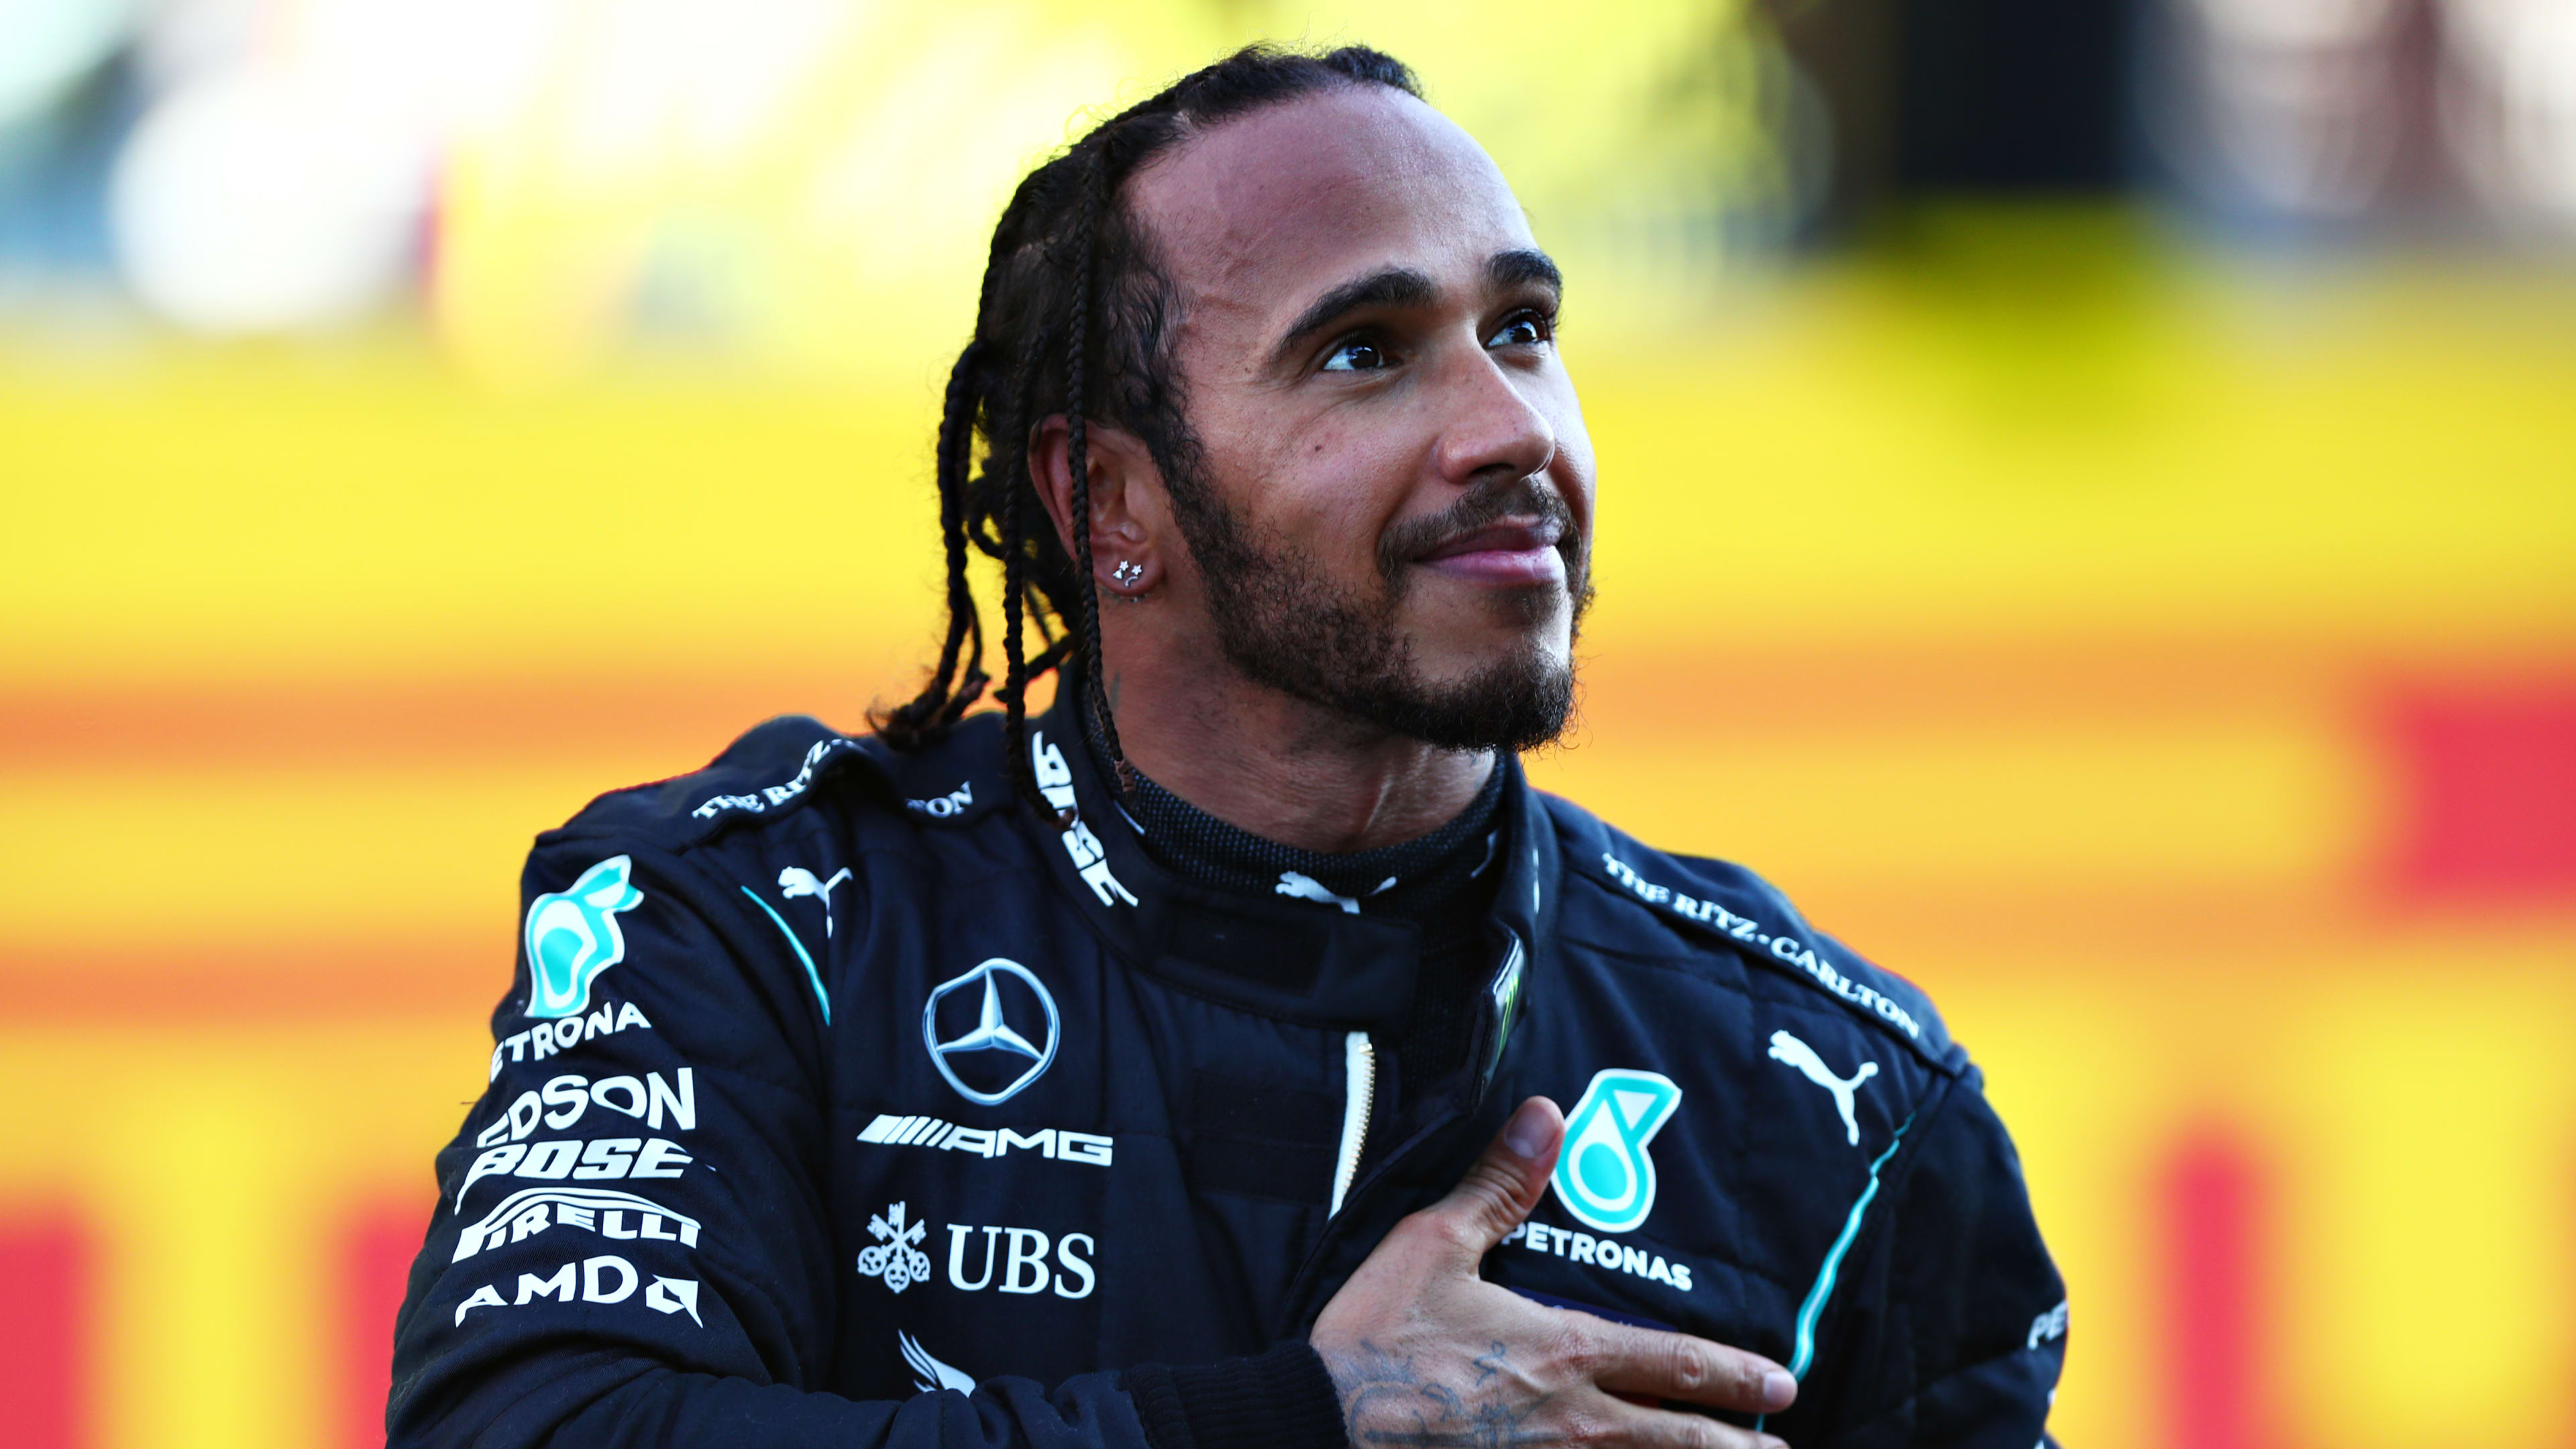 Lewis Hamilton says Red Bull's current car 'is the fastest' he's